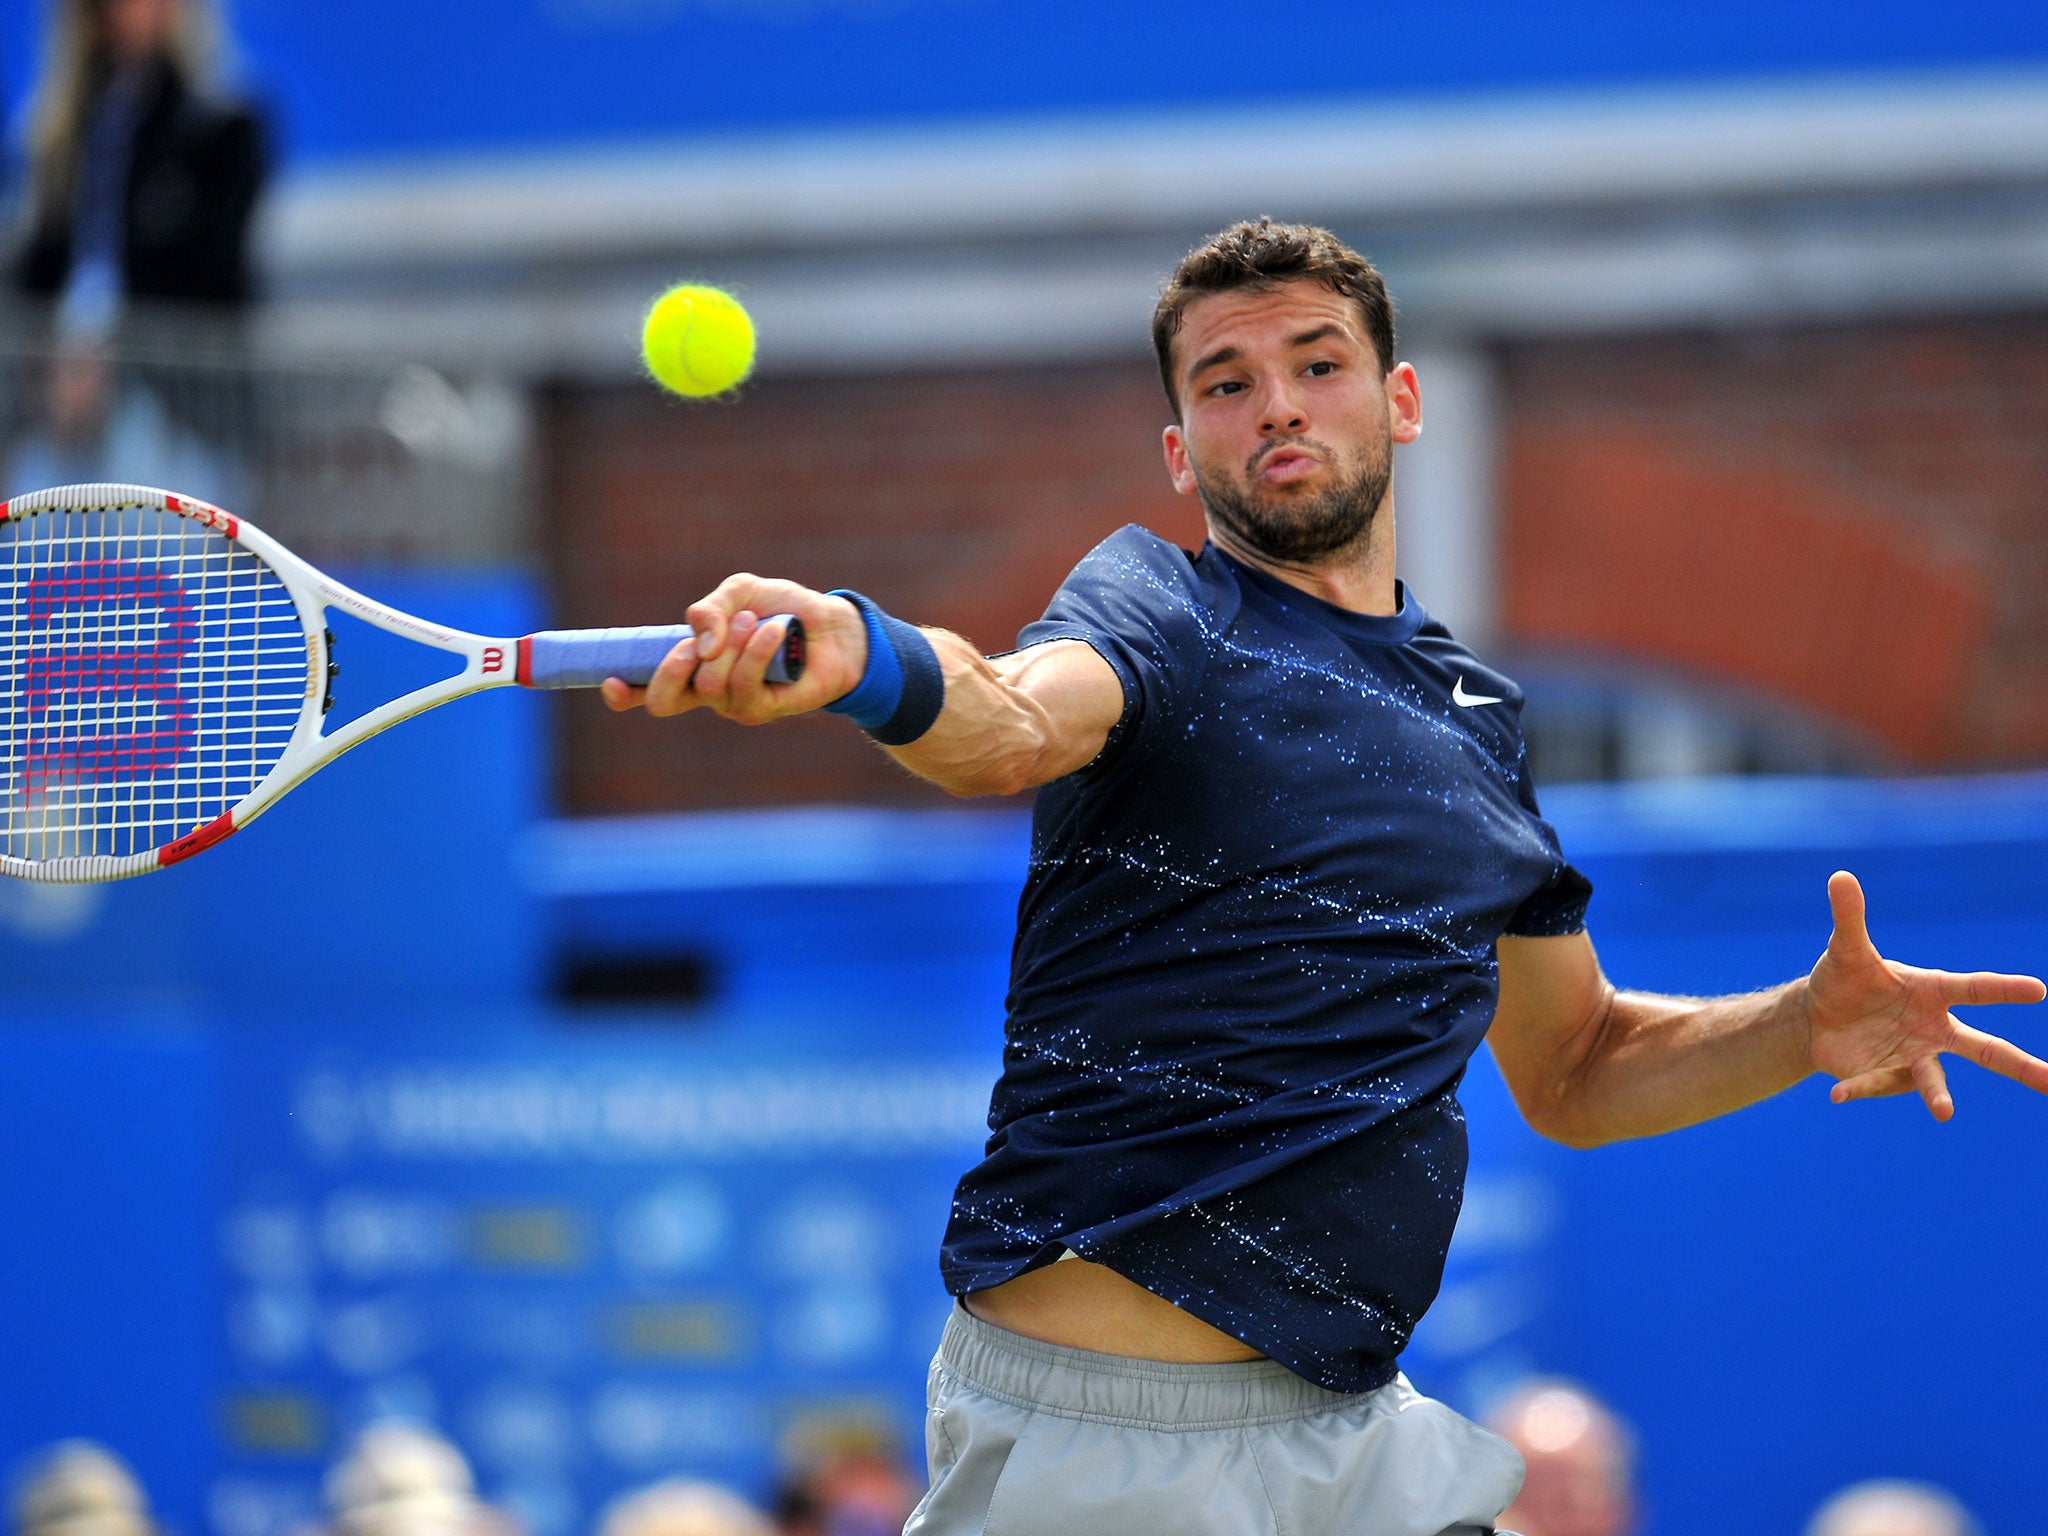 A buoyant Dimitrov on his way to a two-set victory